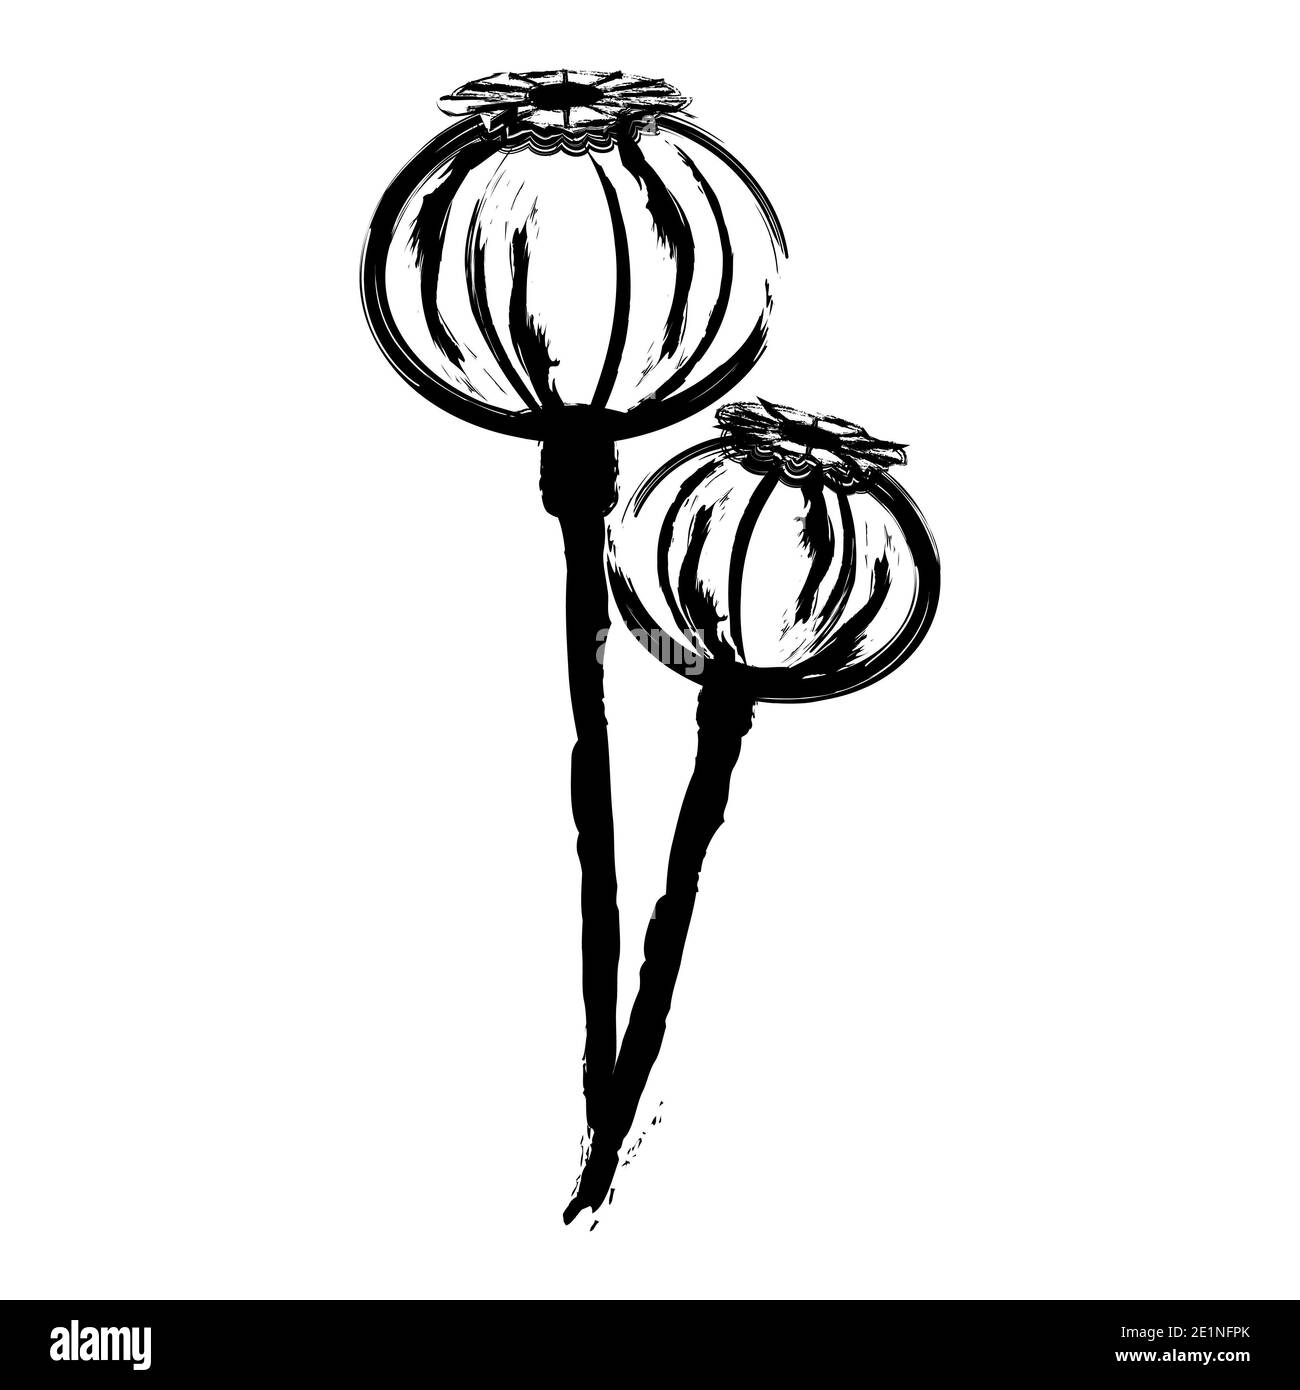 Monochrome sketch of poppy sprigs with seed pods. Black watercolor drawing of poppy heads isolated on white background. Illustration of poppy bolls cl Stock Photo